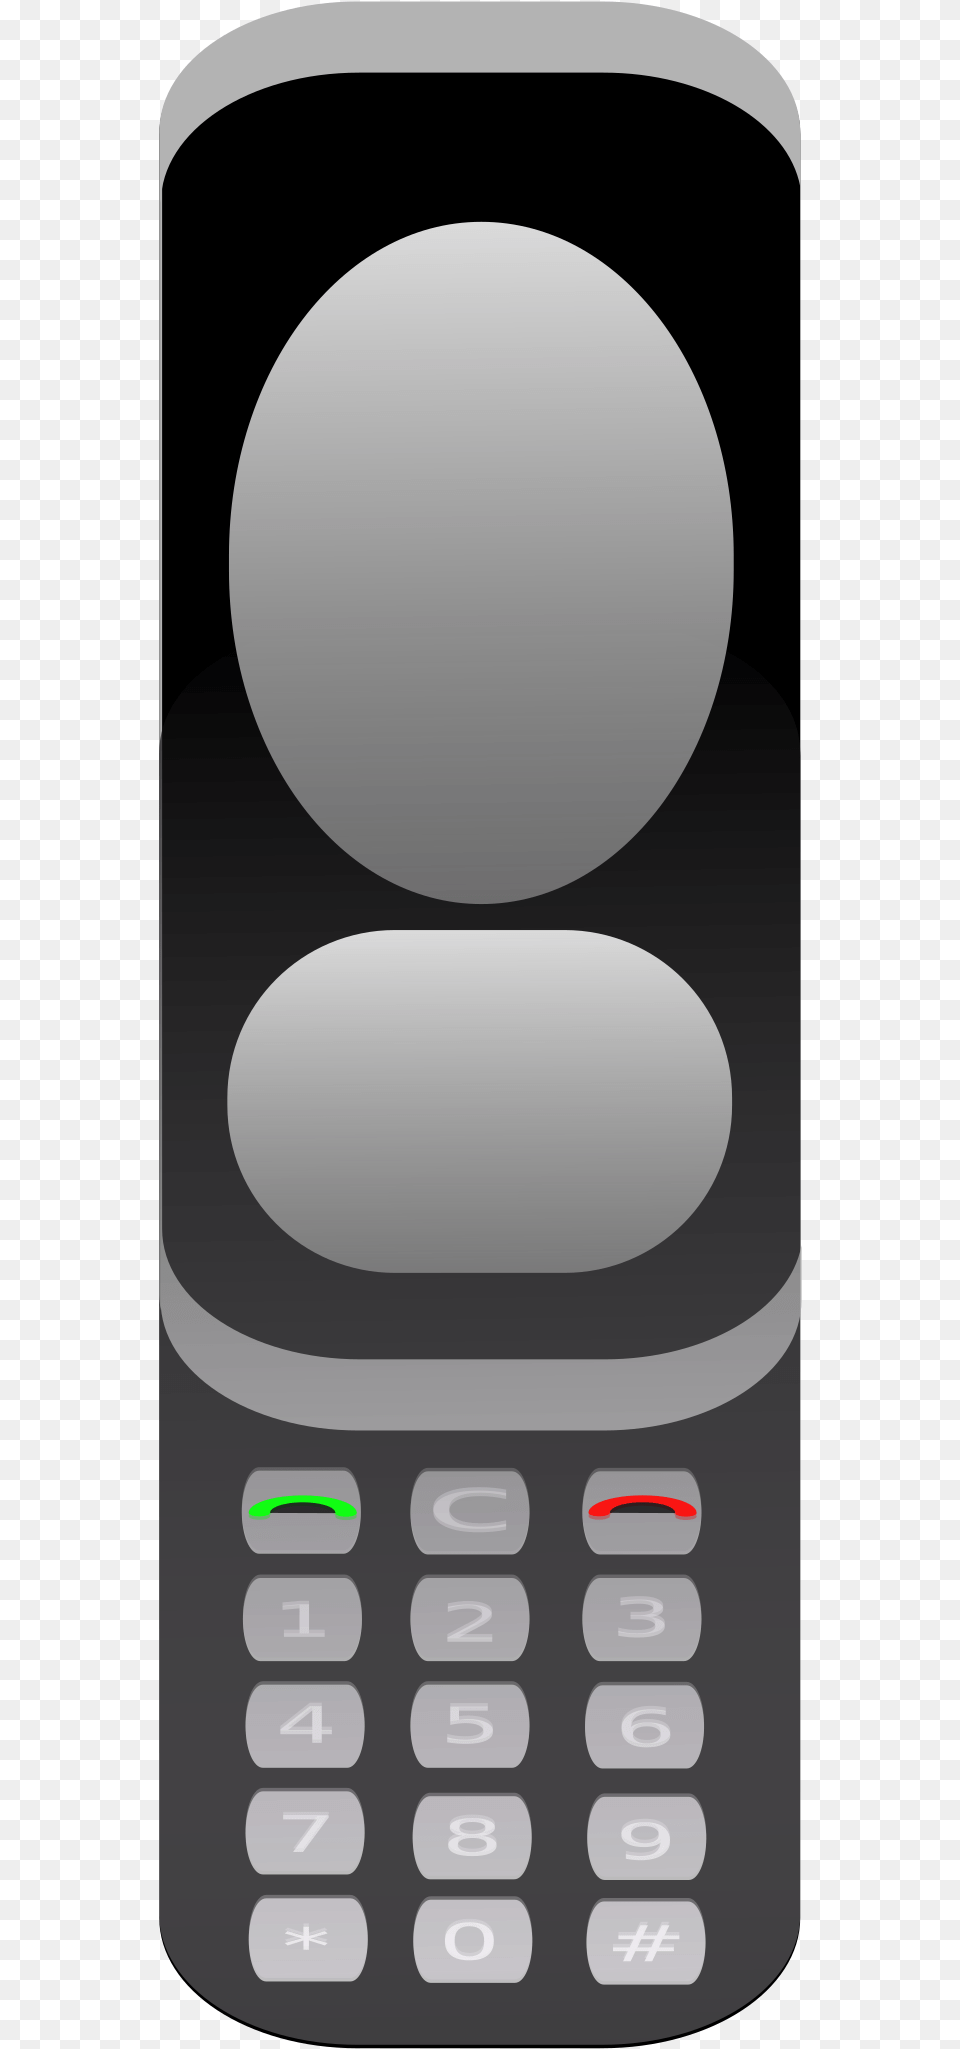 Svg Black And White Cell Shop Of Library Gif De Celulares, Electronics, Mobile Phone, Phone Png